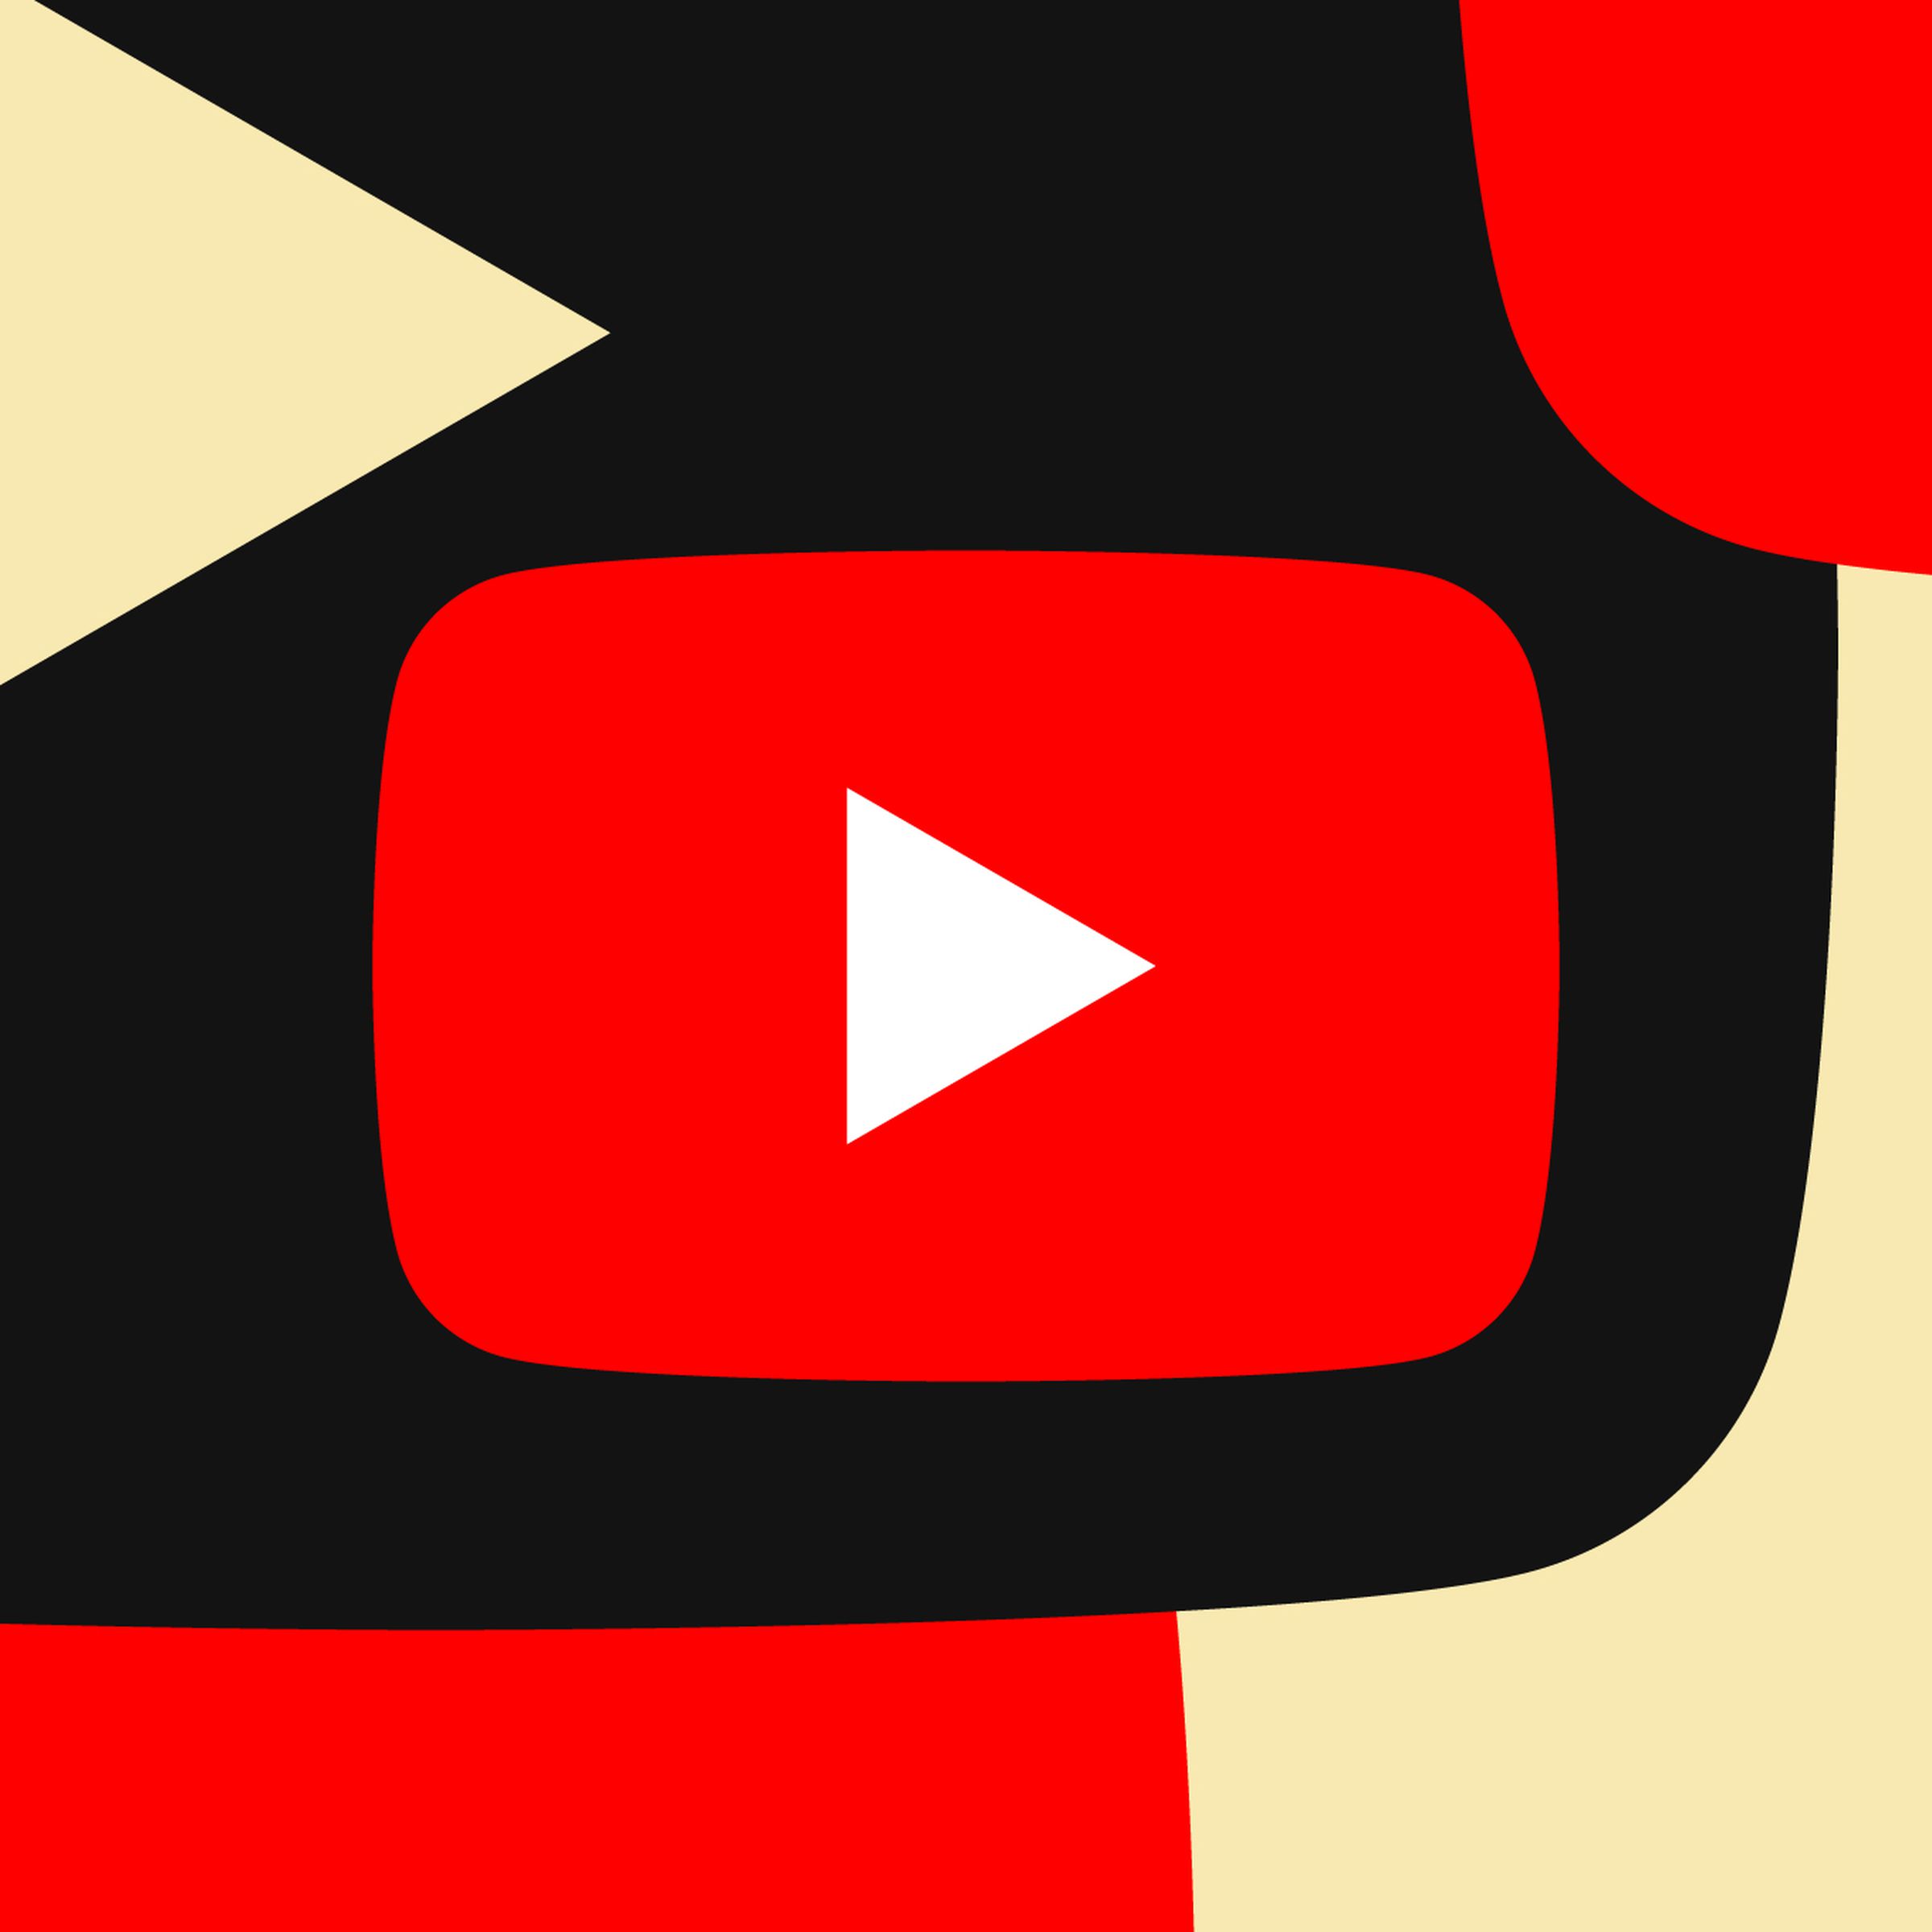 YouTube logo image in red over a geometric red, black, and cream background